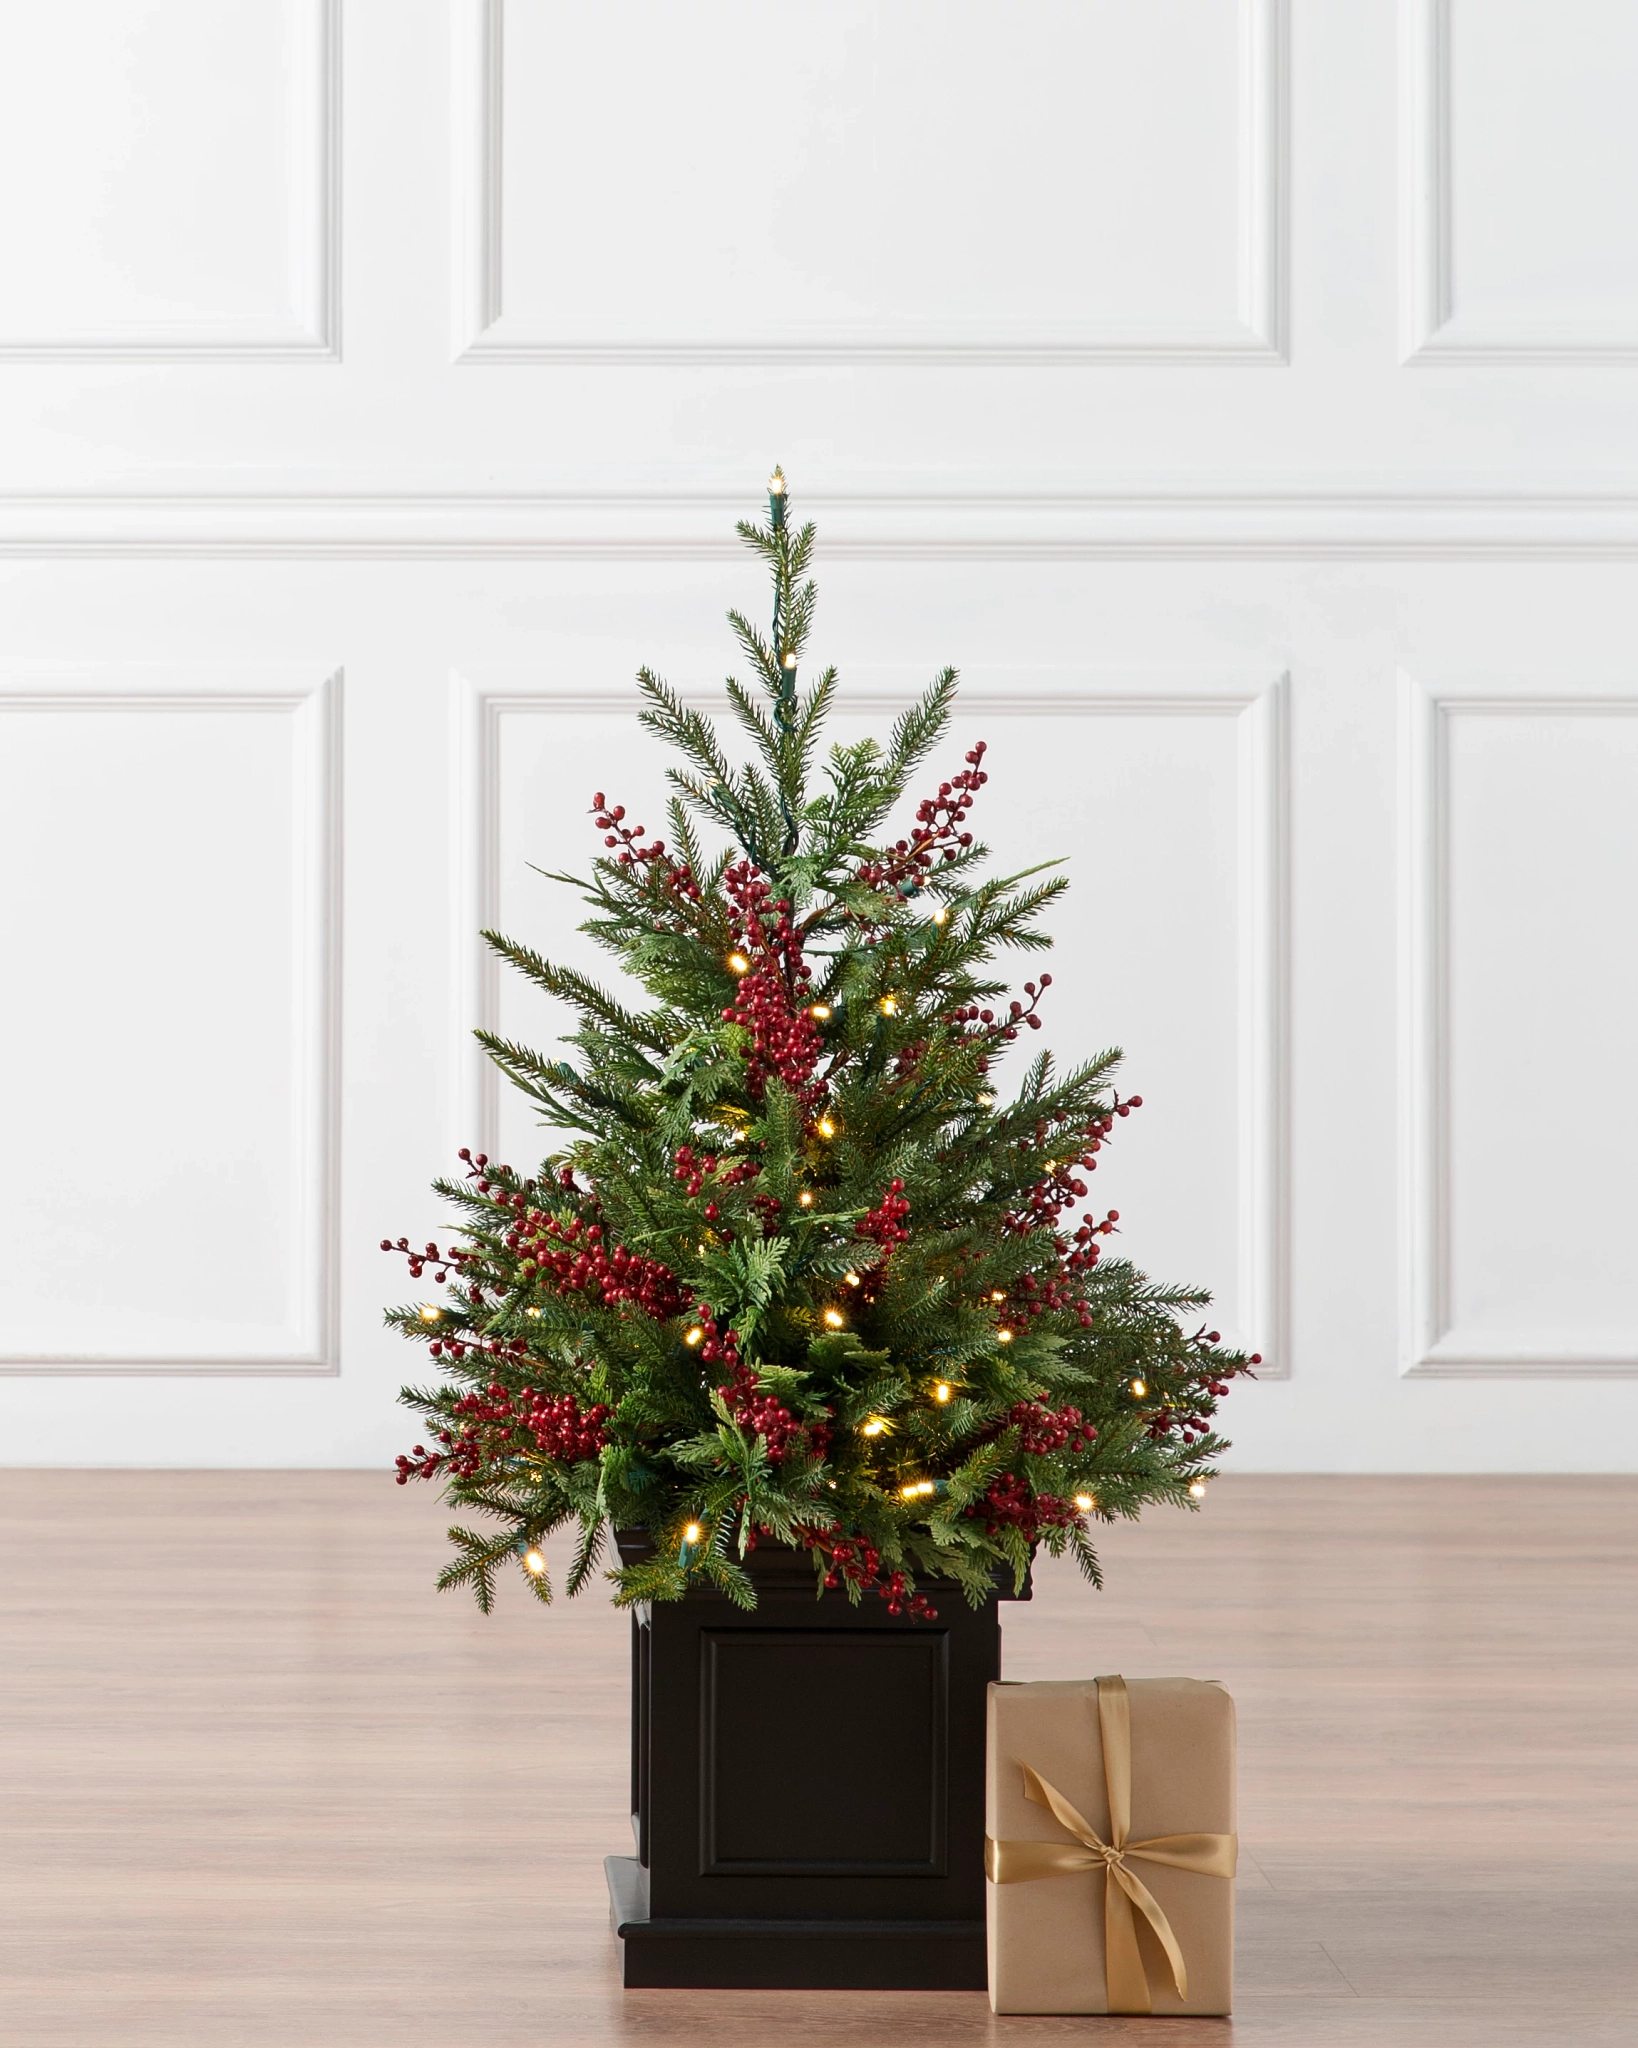 Customer Favorite 2 Sizes Available Pretty, Realistic Evergreen